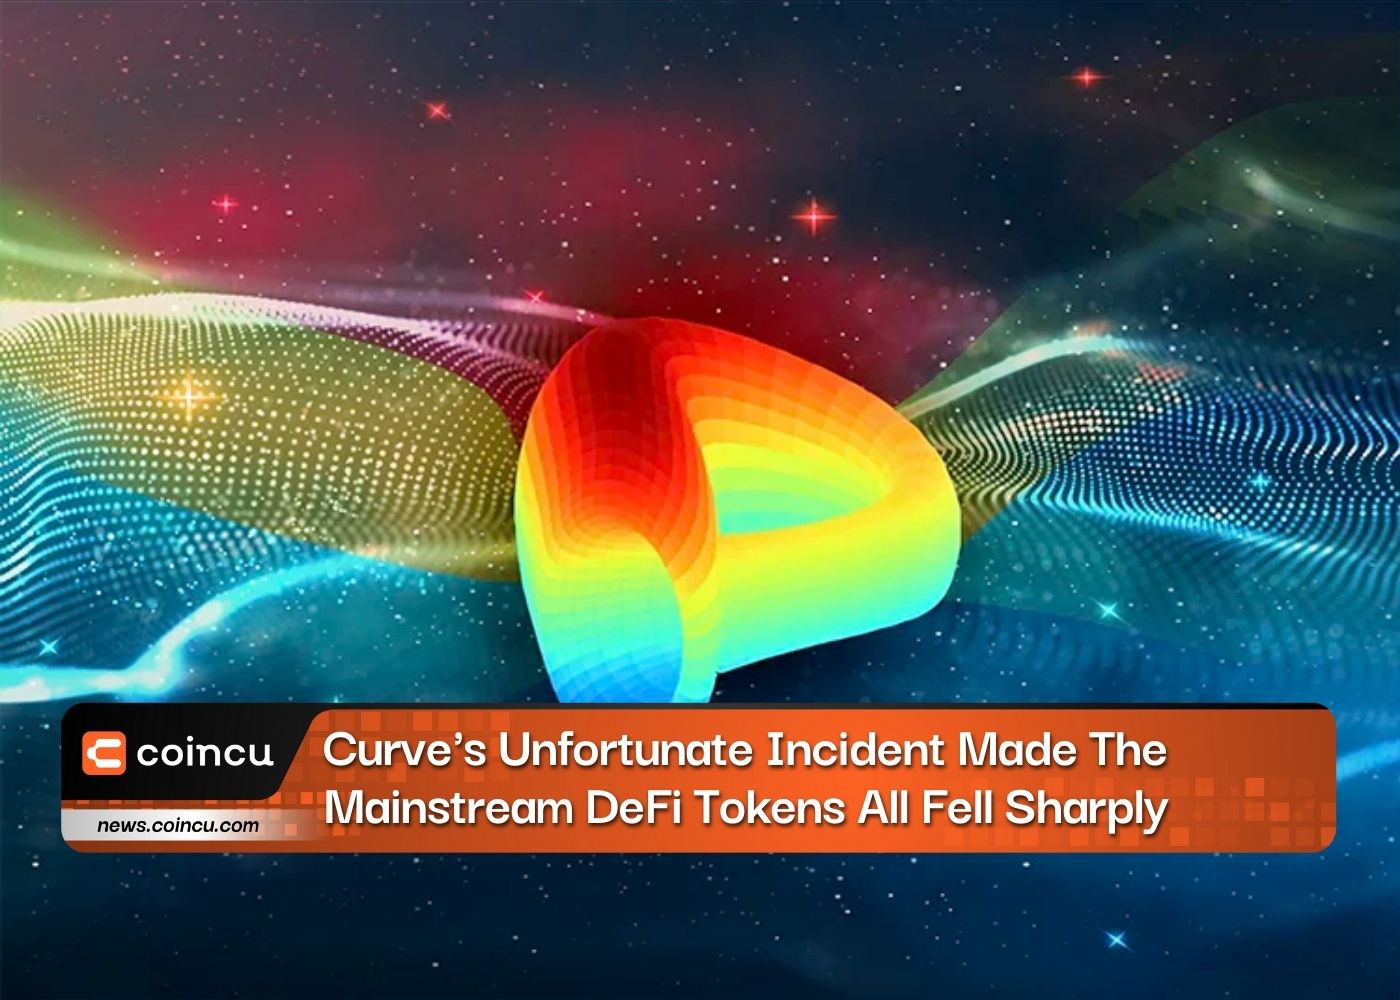 Curve's Unfortunate Incident Made The Mainstream DeFi Tokens All Fell Sharply